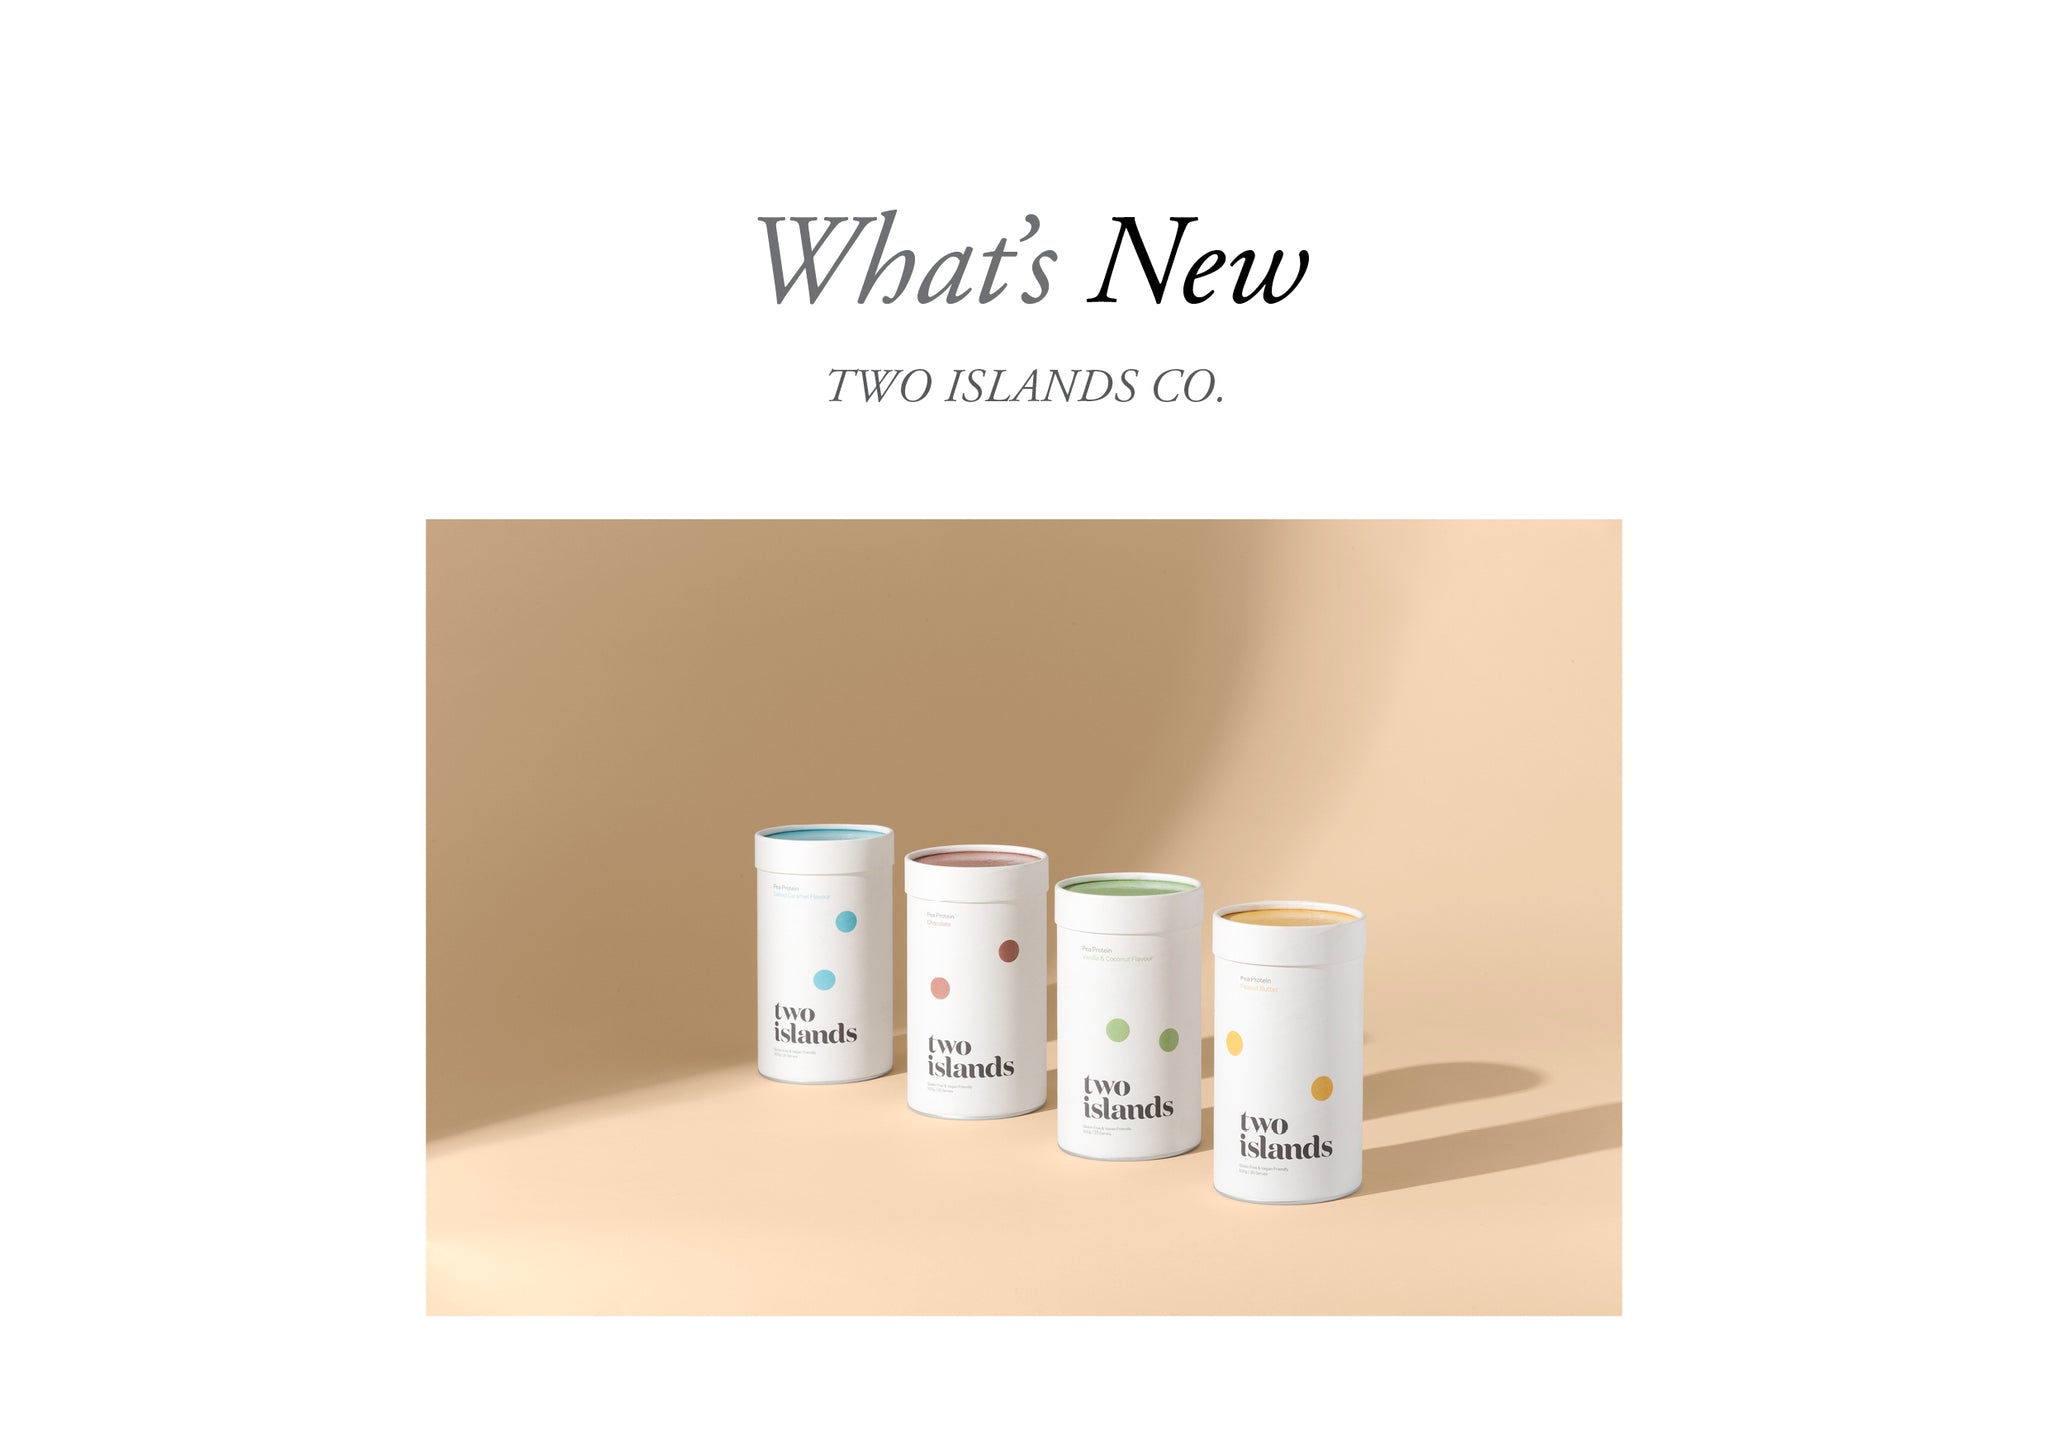 NEW Two Islands Collagen Beauty Powder and Protein Powder Range